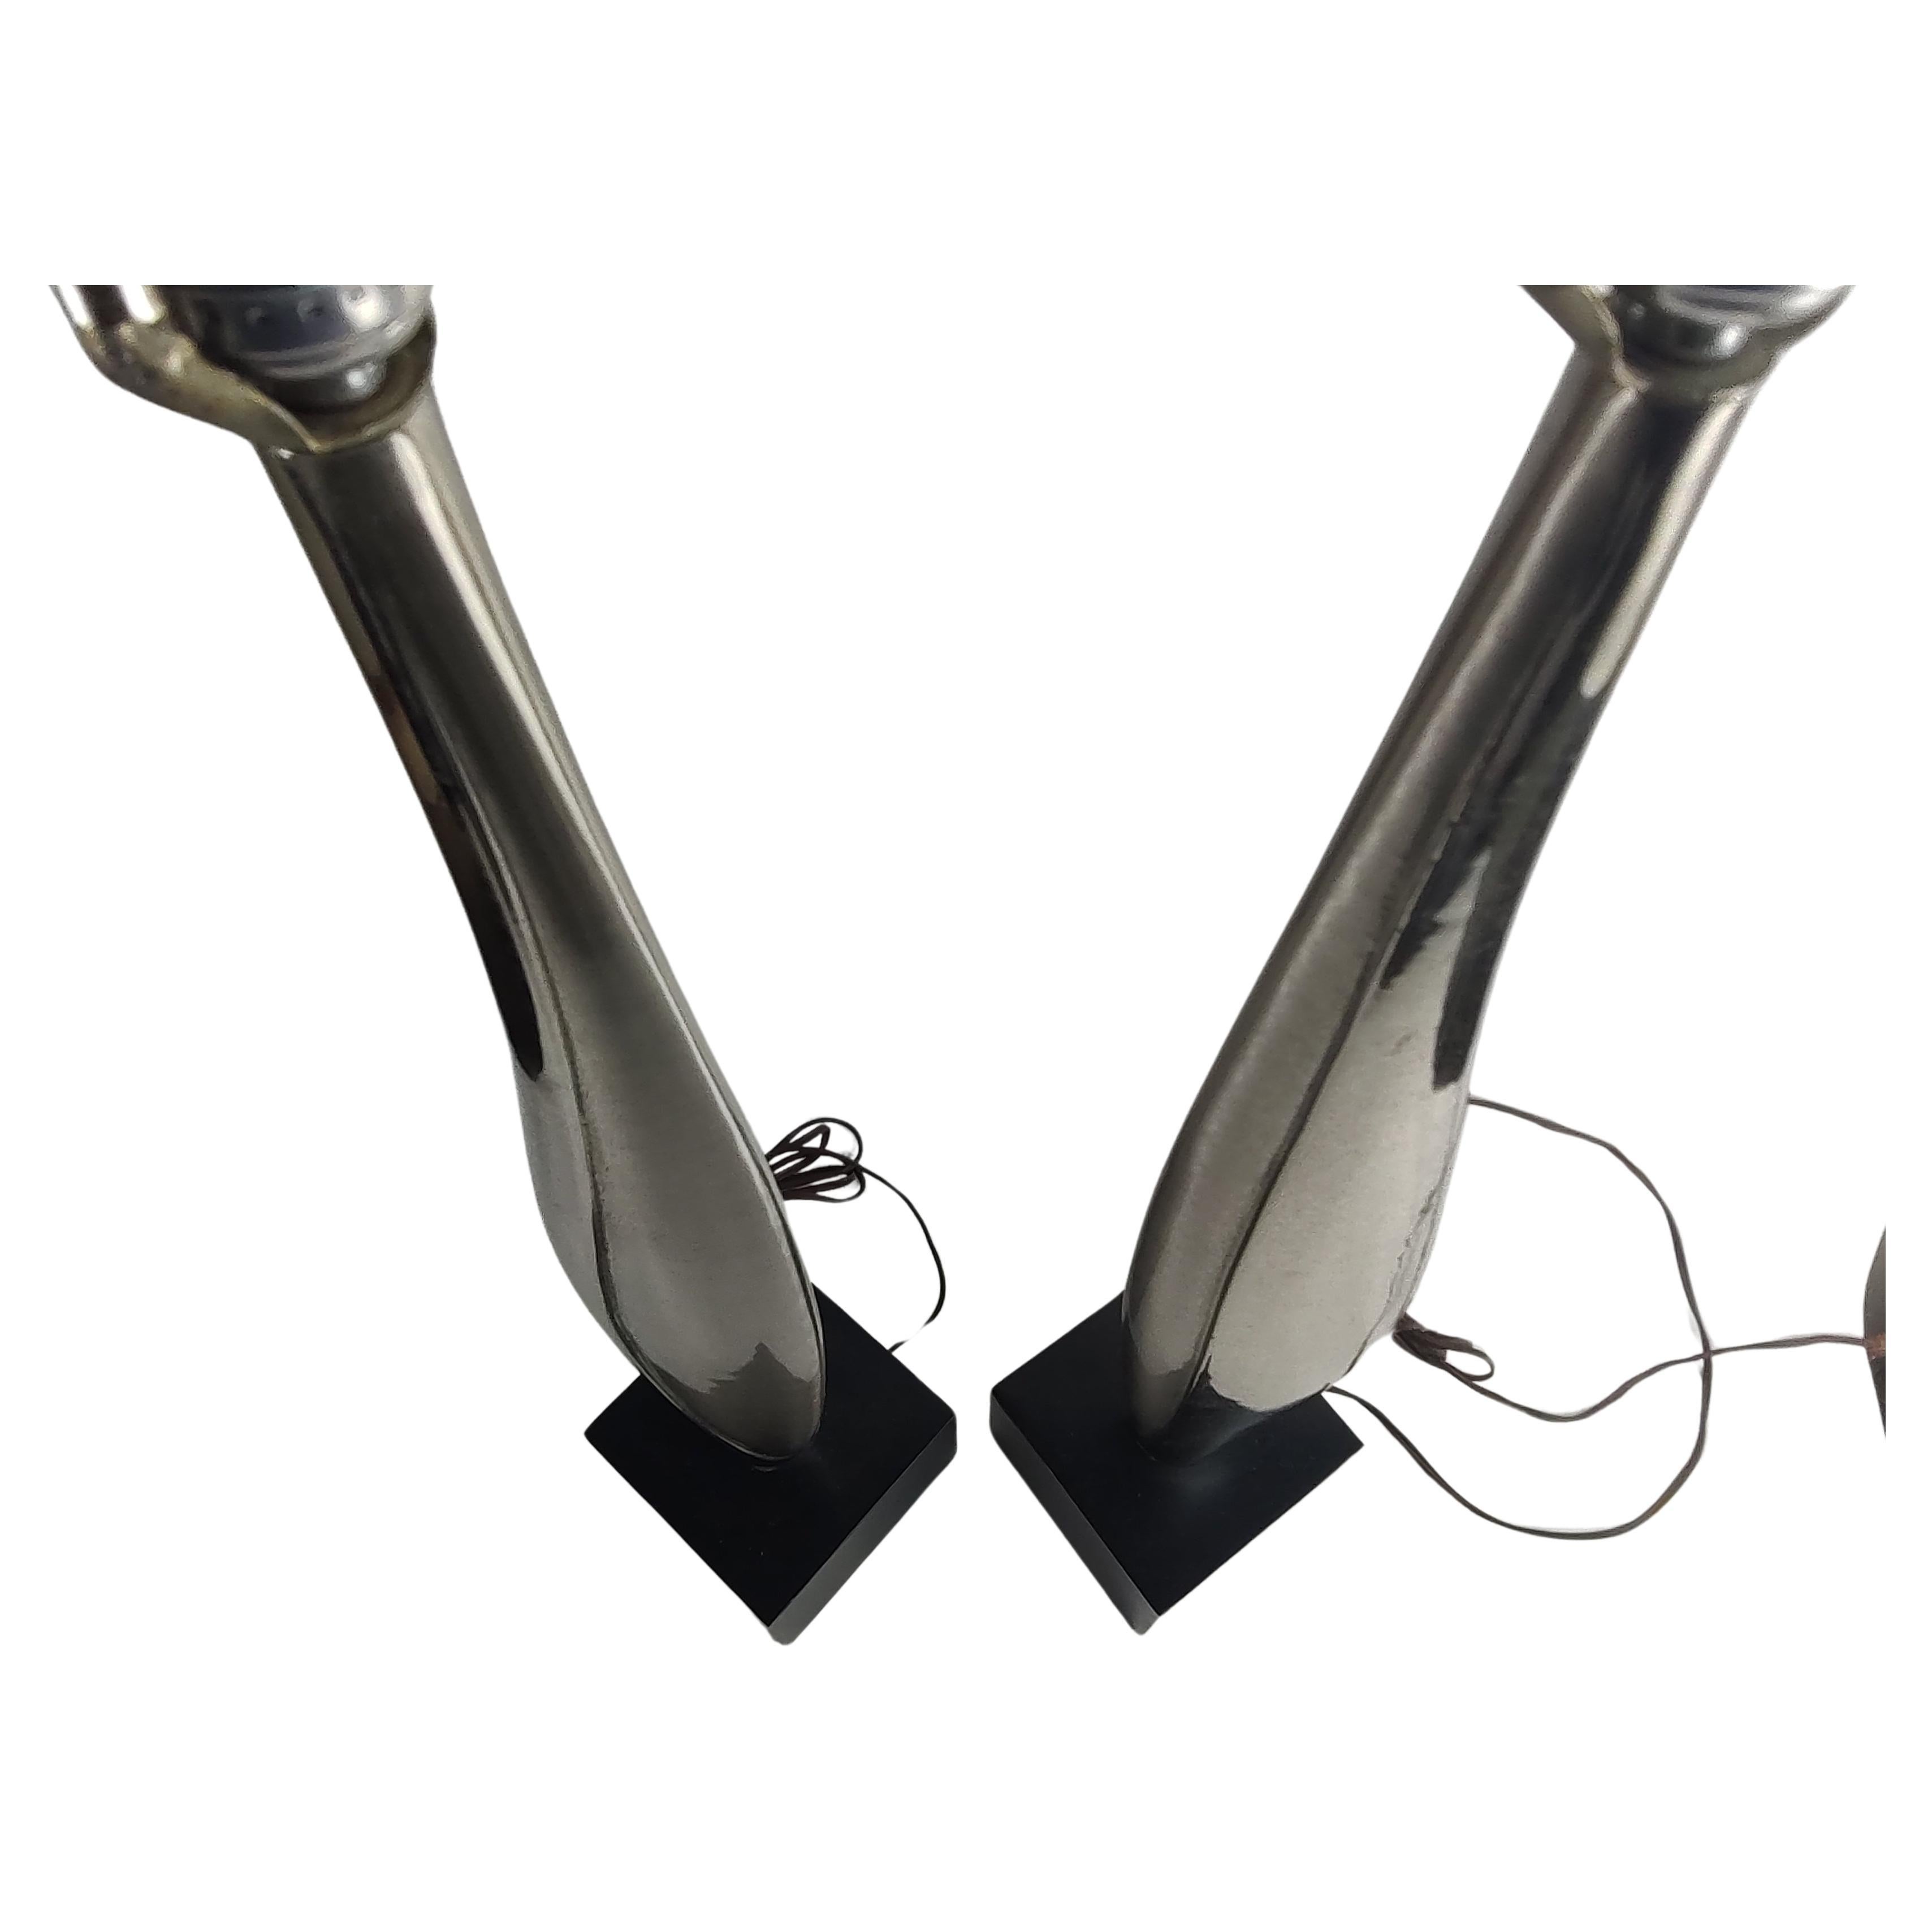 Brutalist Pair of Mid Century Modern Sculptural Chrome w Black Bases by Laurel Lamp Co. For Sale